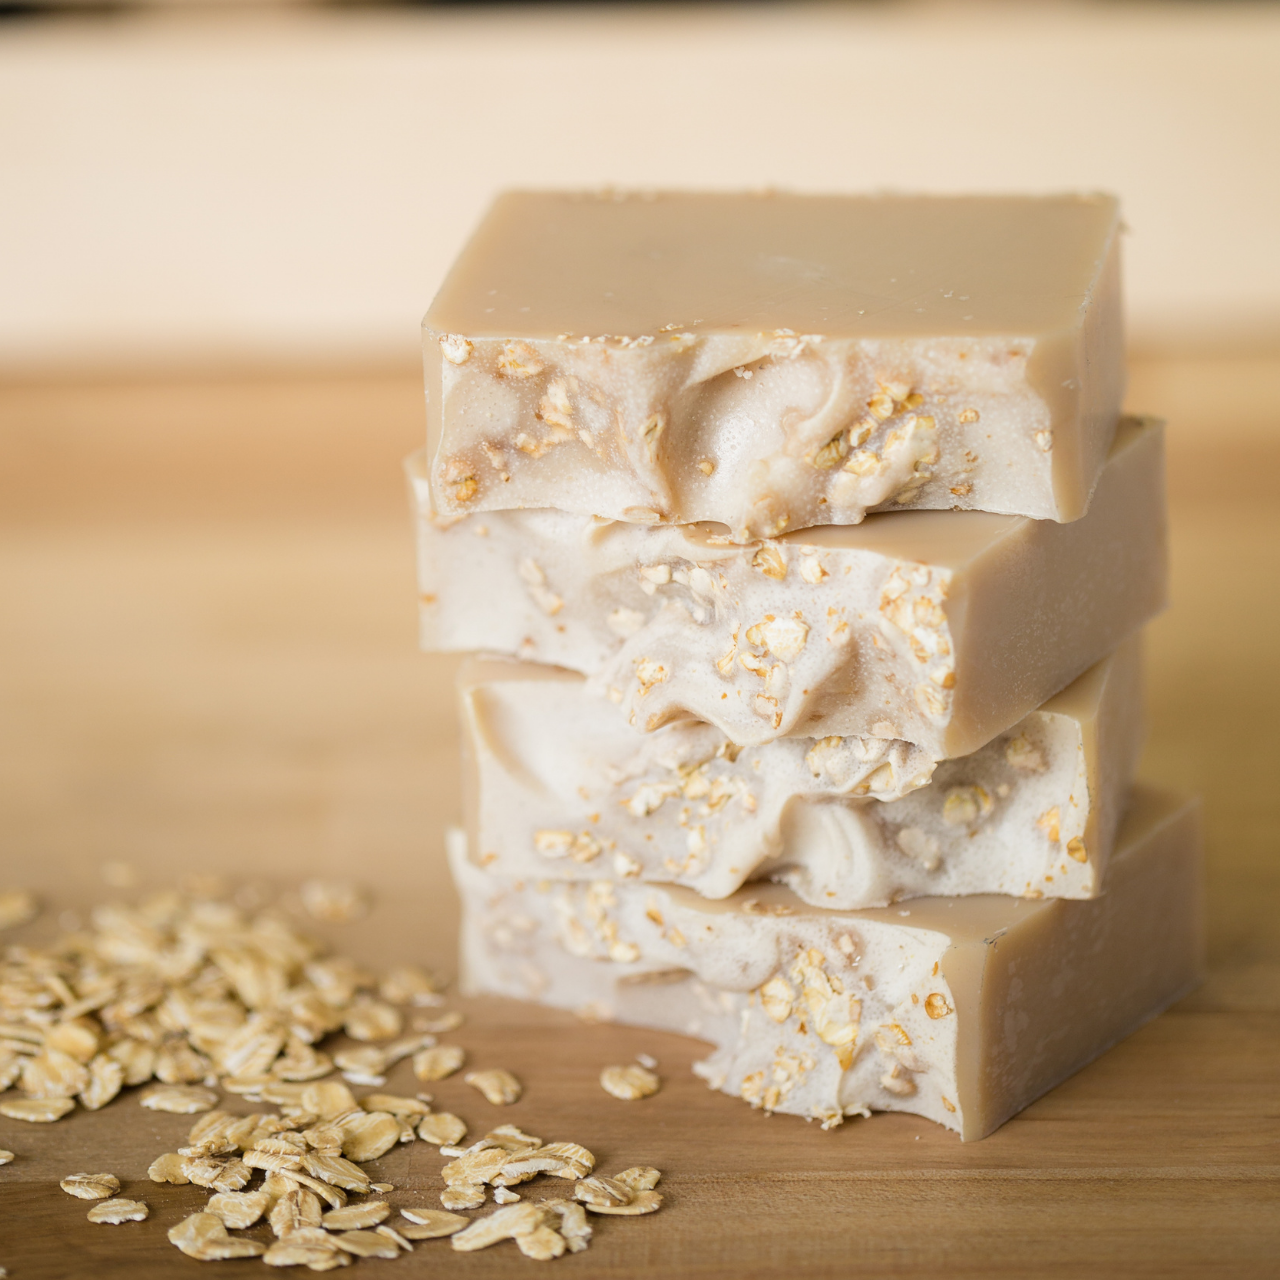 A must-have for anyone! Its aroma envelops you in a blanket of calm, peace, and serenity. The oatmeal flakes seep their benefits into the soap and provide a gentle exfoliation to the skin.  Edit alt text